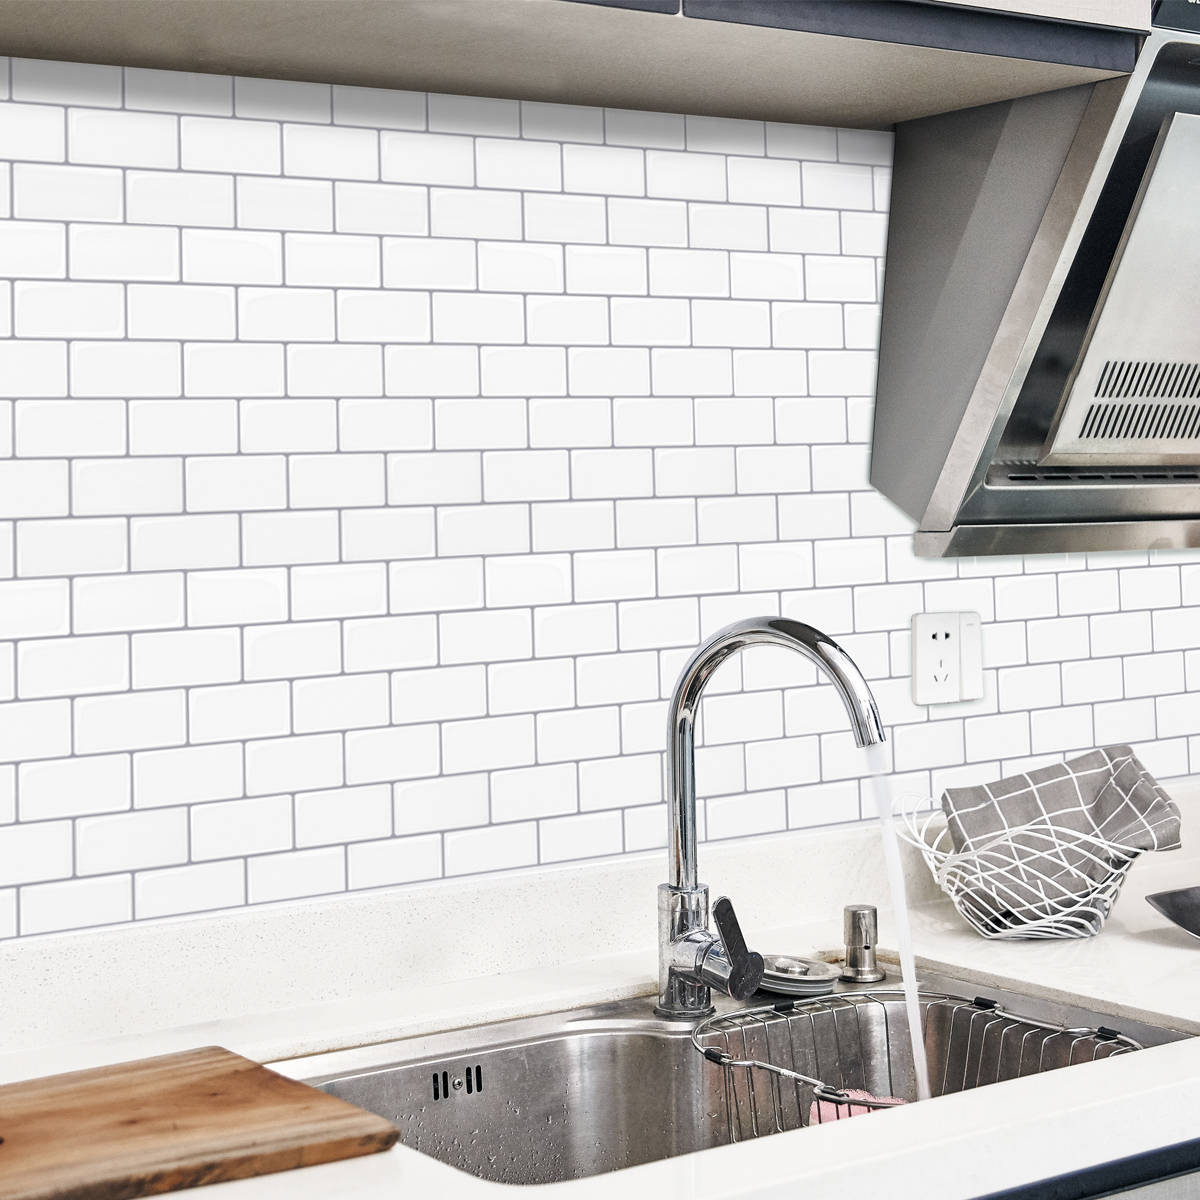 Peel-and-stick tiles come is many color and style options. This subway tile looks so much like ...